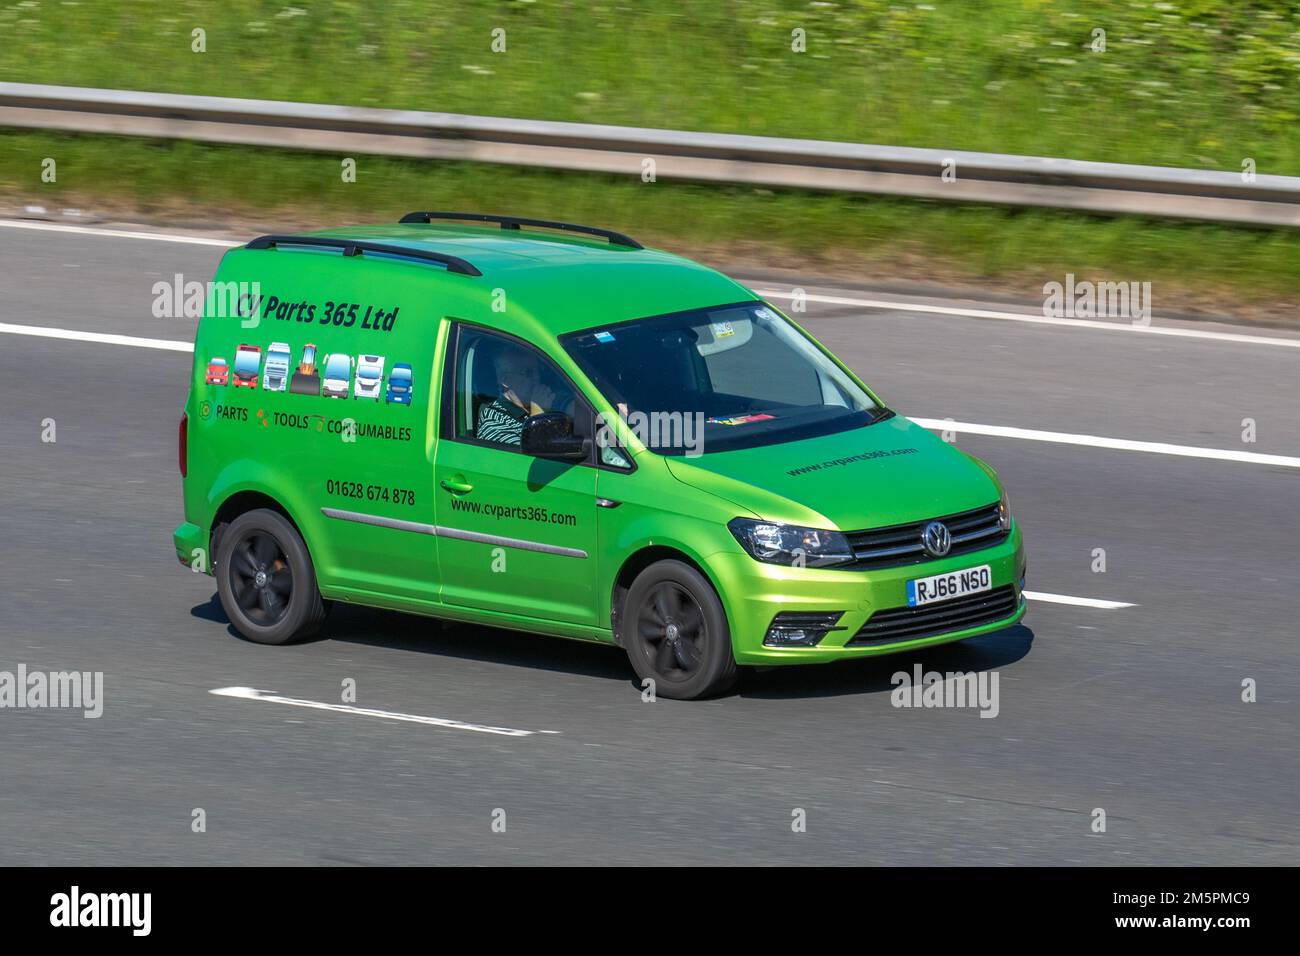 C V PARTS 365 Ltd Motor Trade Parts, Tools, Consumables. 2016 Green VW VOLKSWAGEN CADDY 1968cc Diesel 5 speed manual; travelling on the M6 Motorway UK Stock Photo